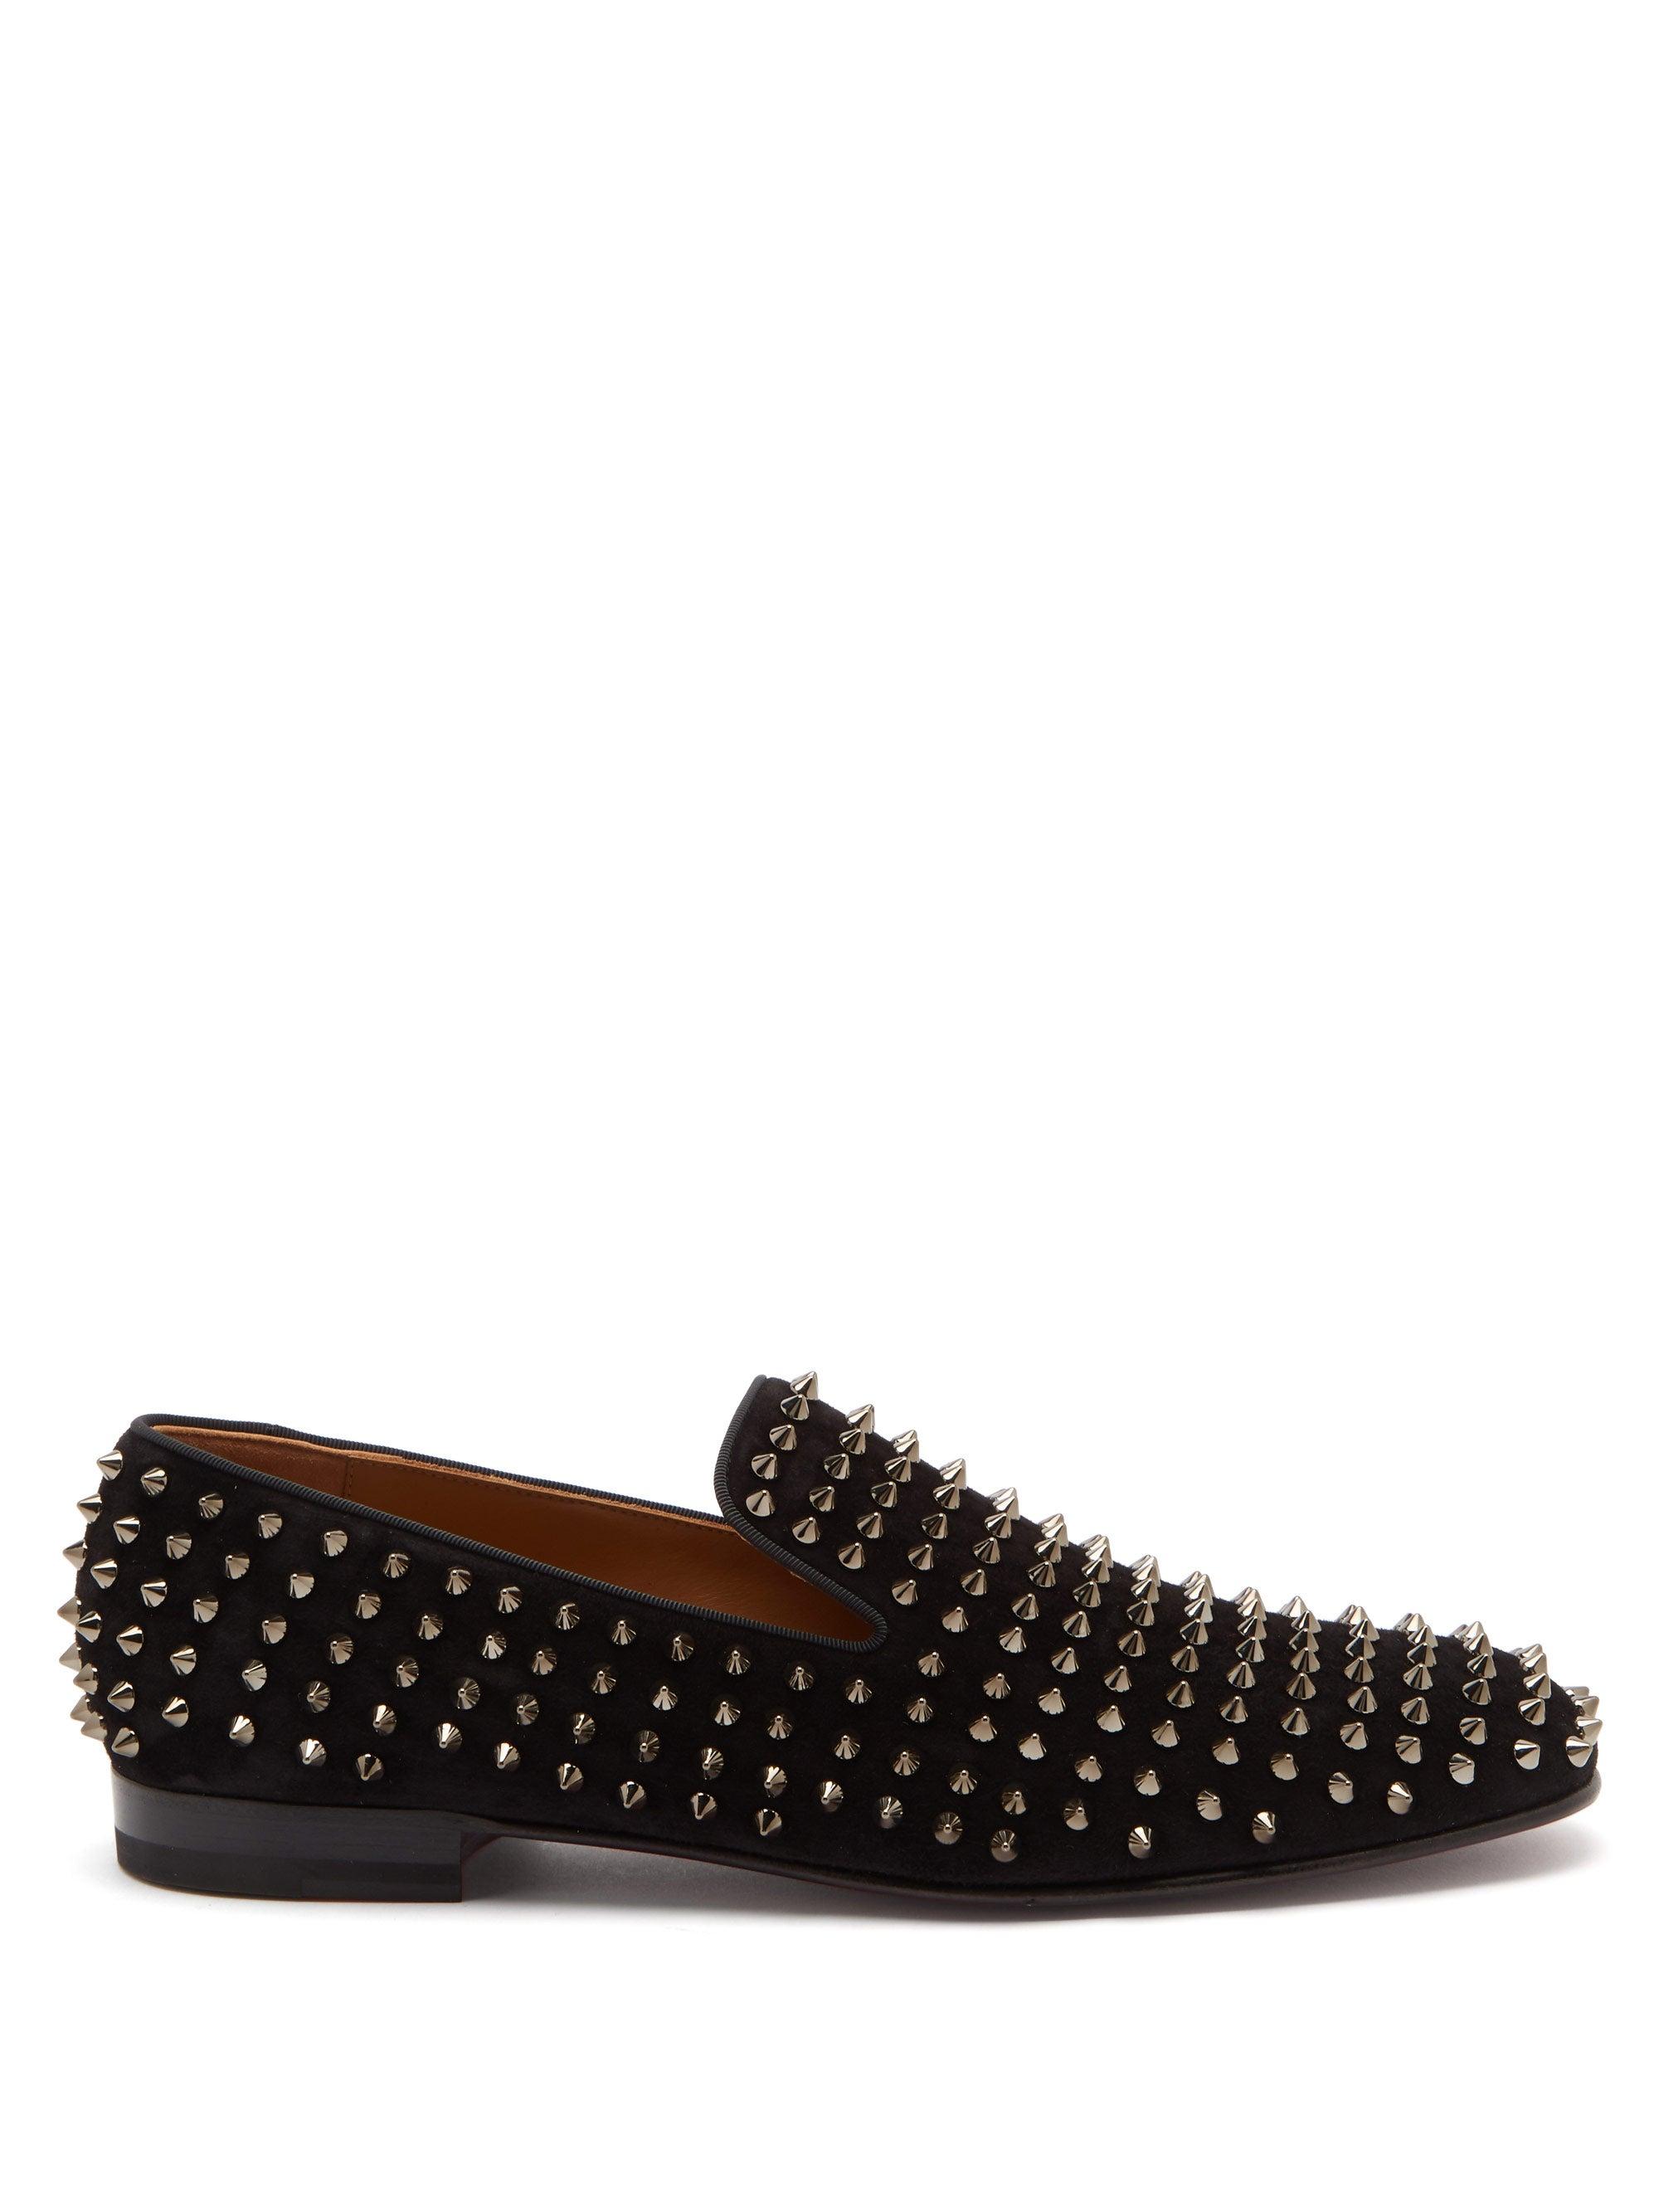 Christian Louboutin Leather Roller Boy Spikes Loafer in Black for 